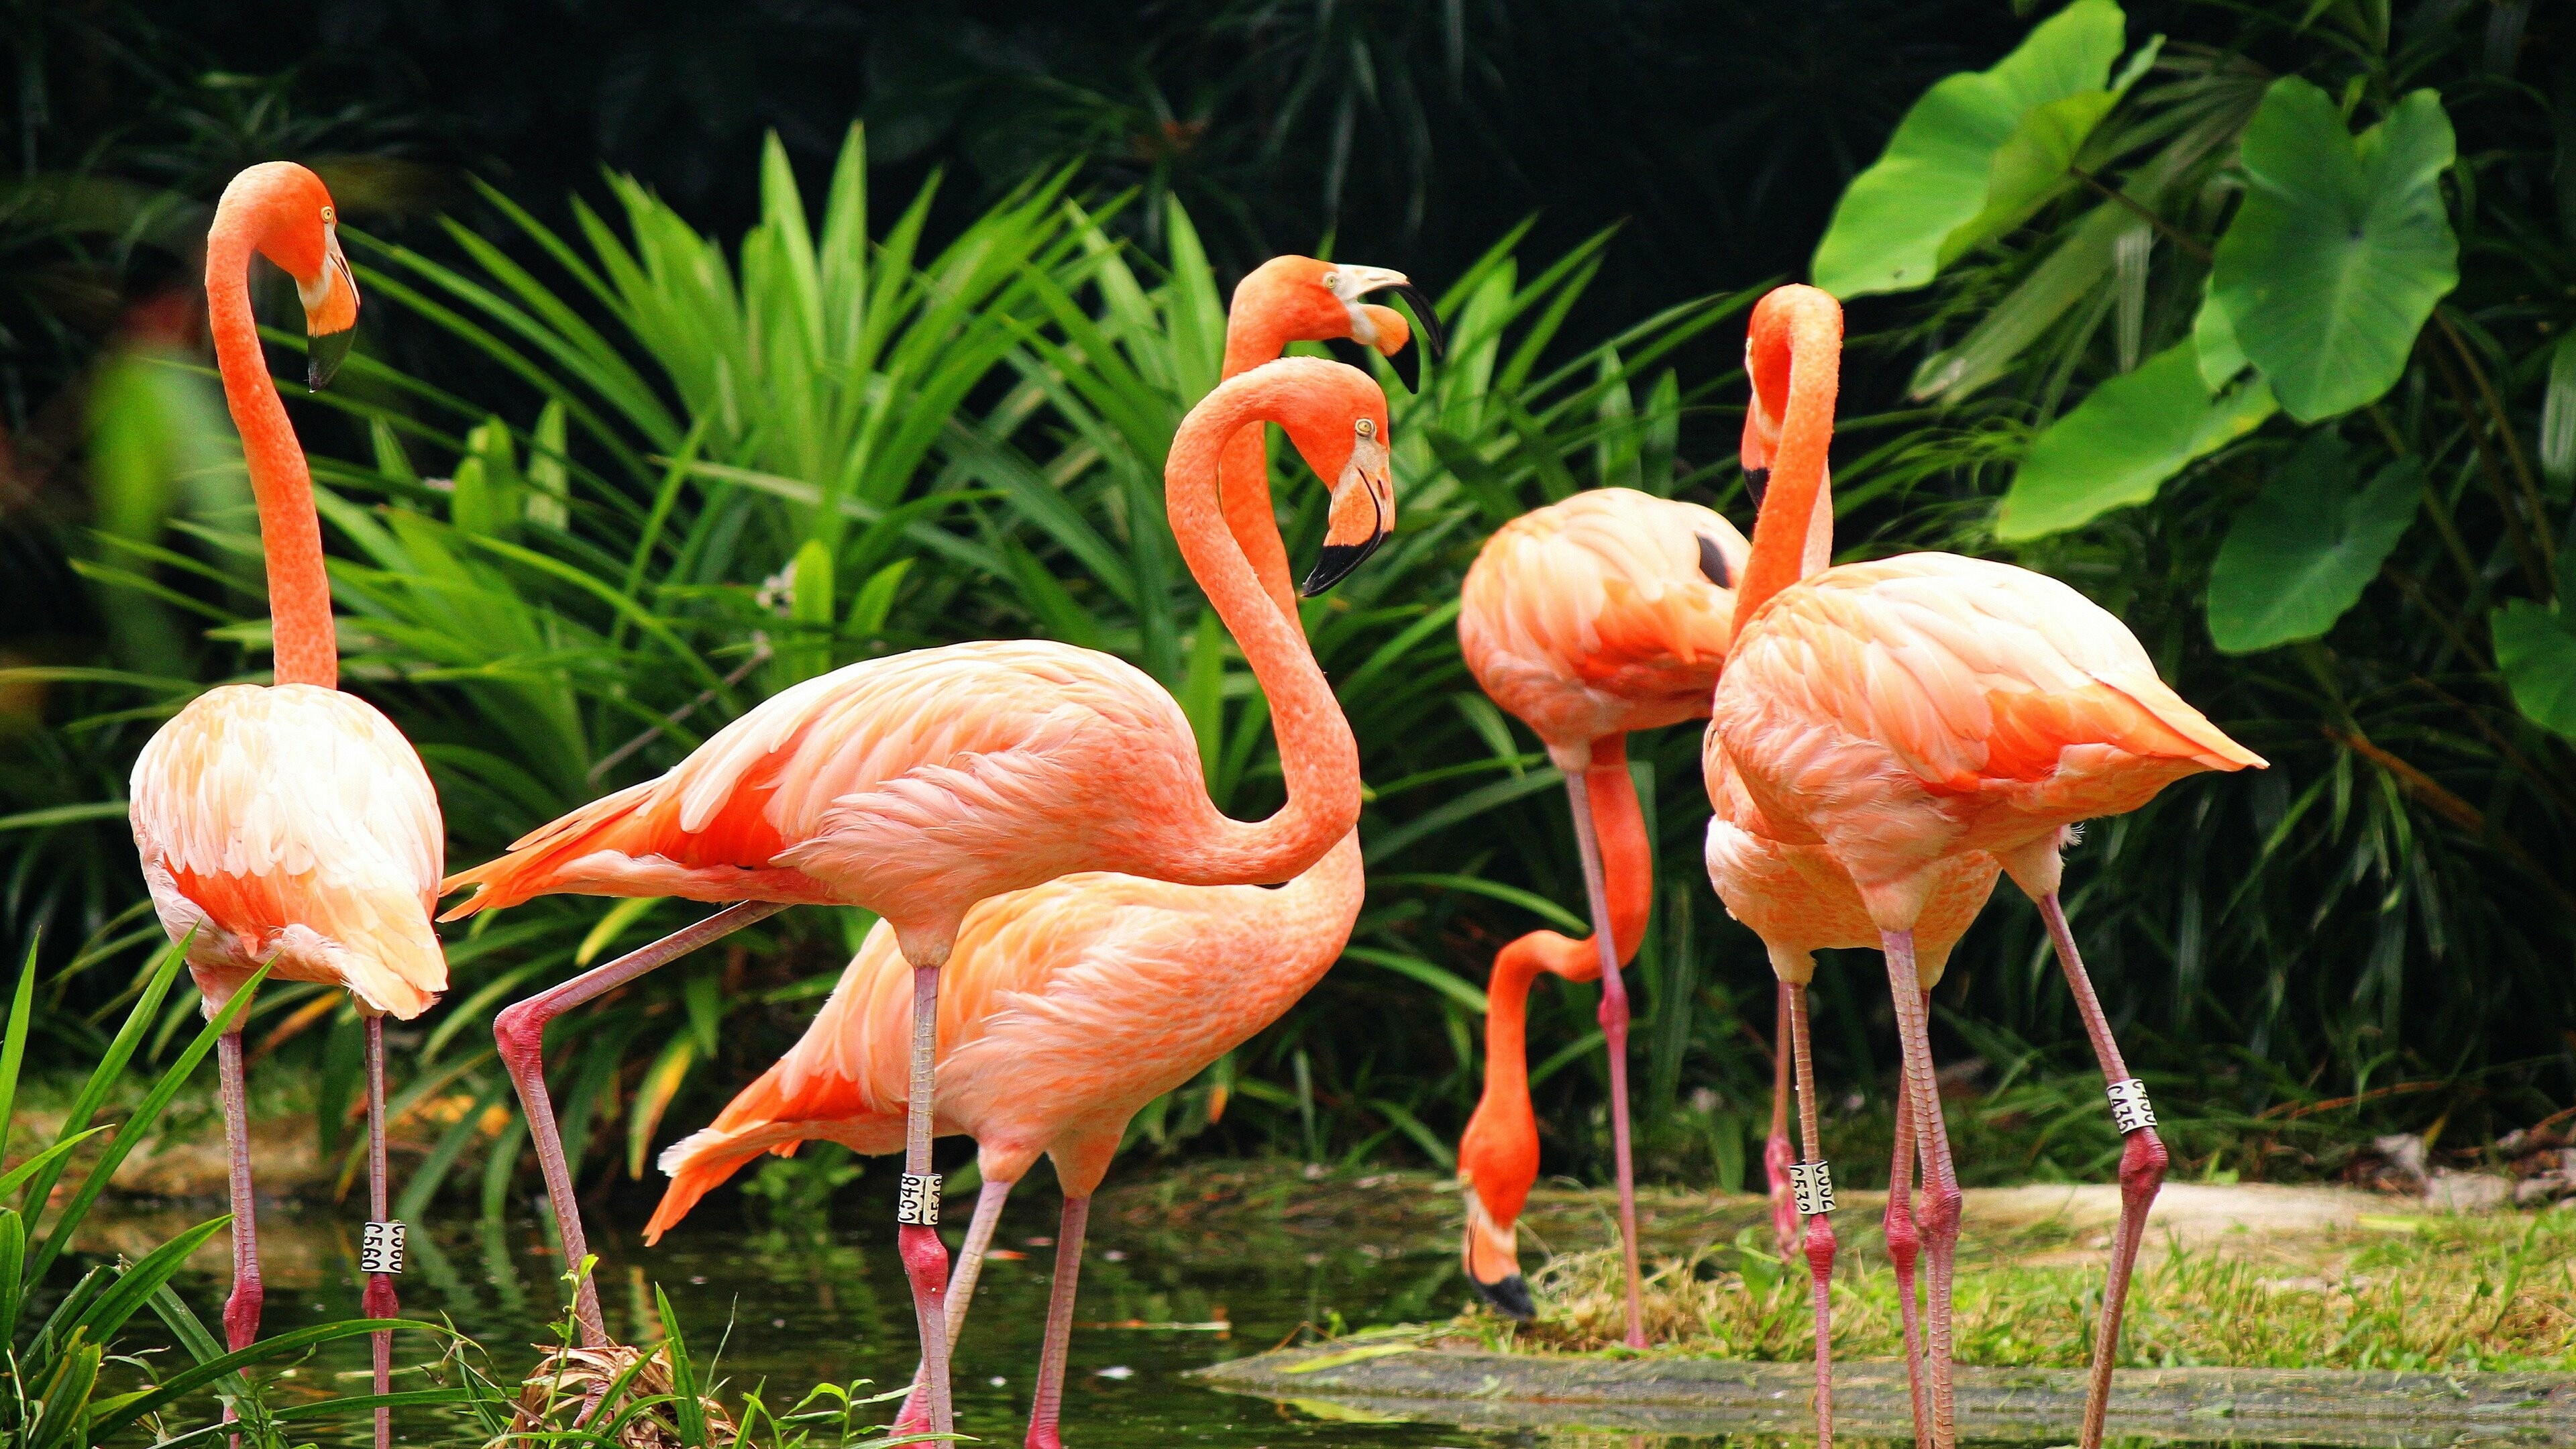 Flamingo: Phoenicopteridae, Social birds that live in groups of varying sizes. 3840x2160 4K Wallpaper.